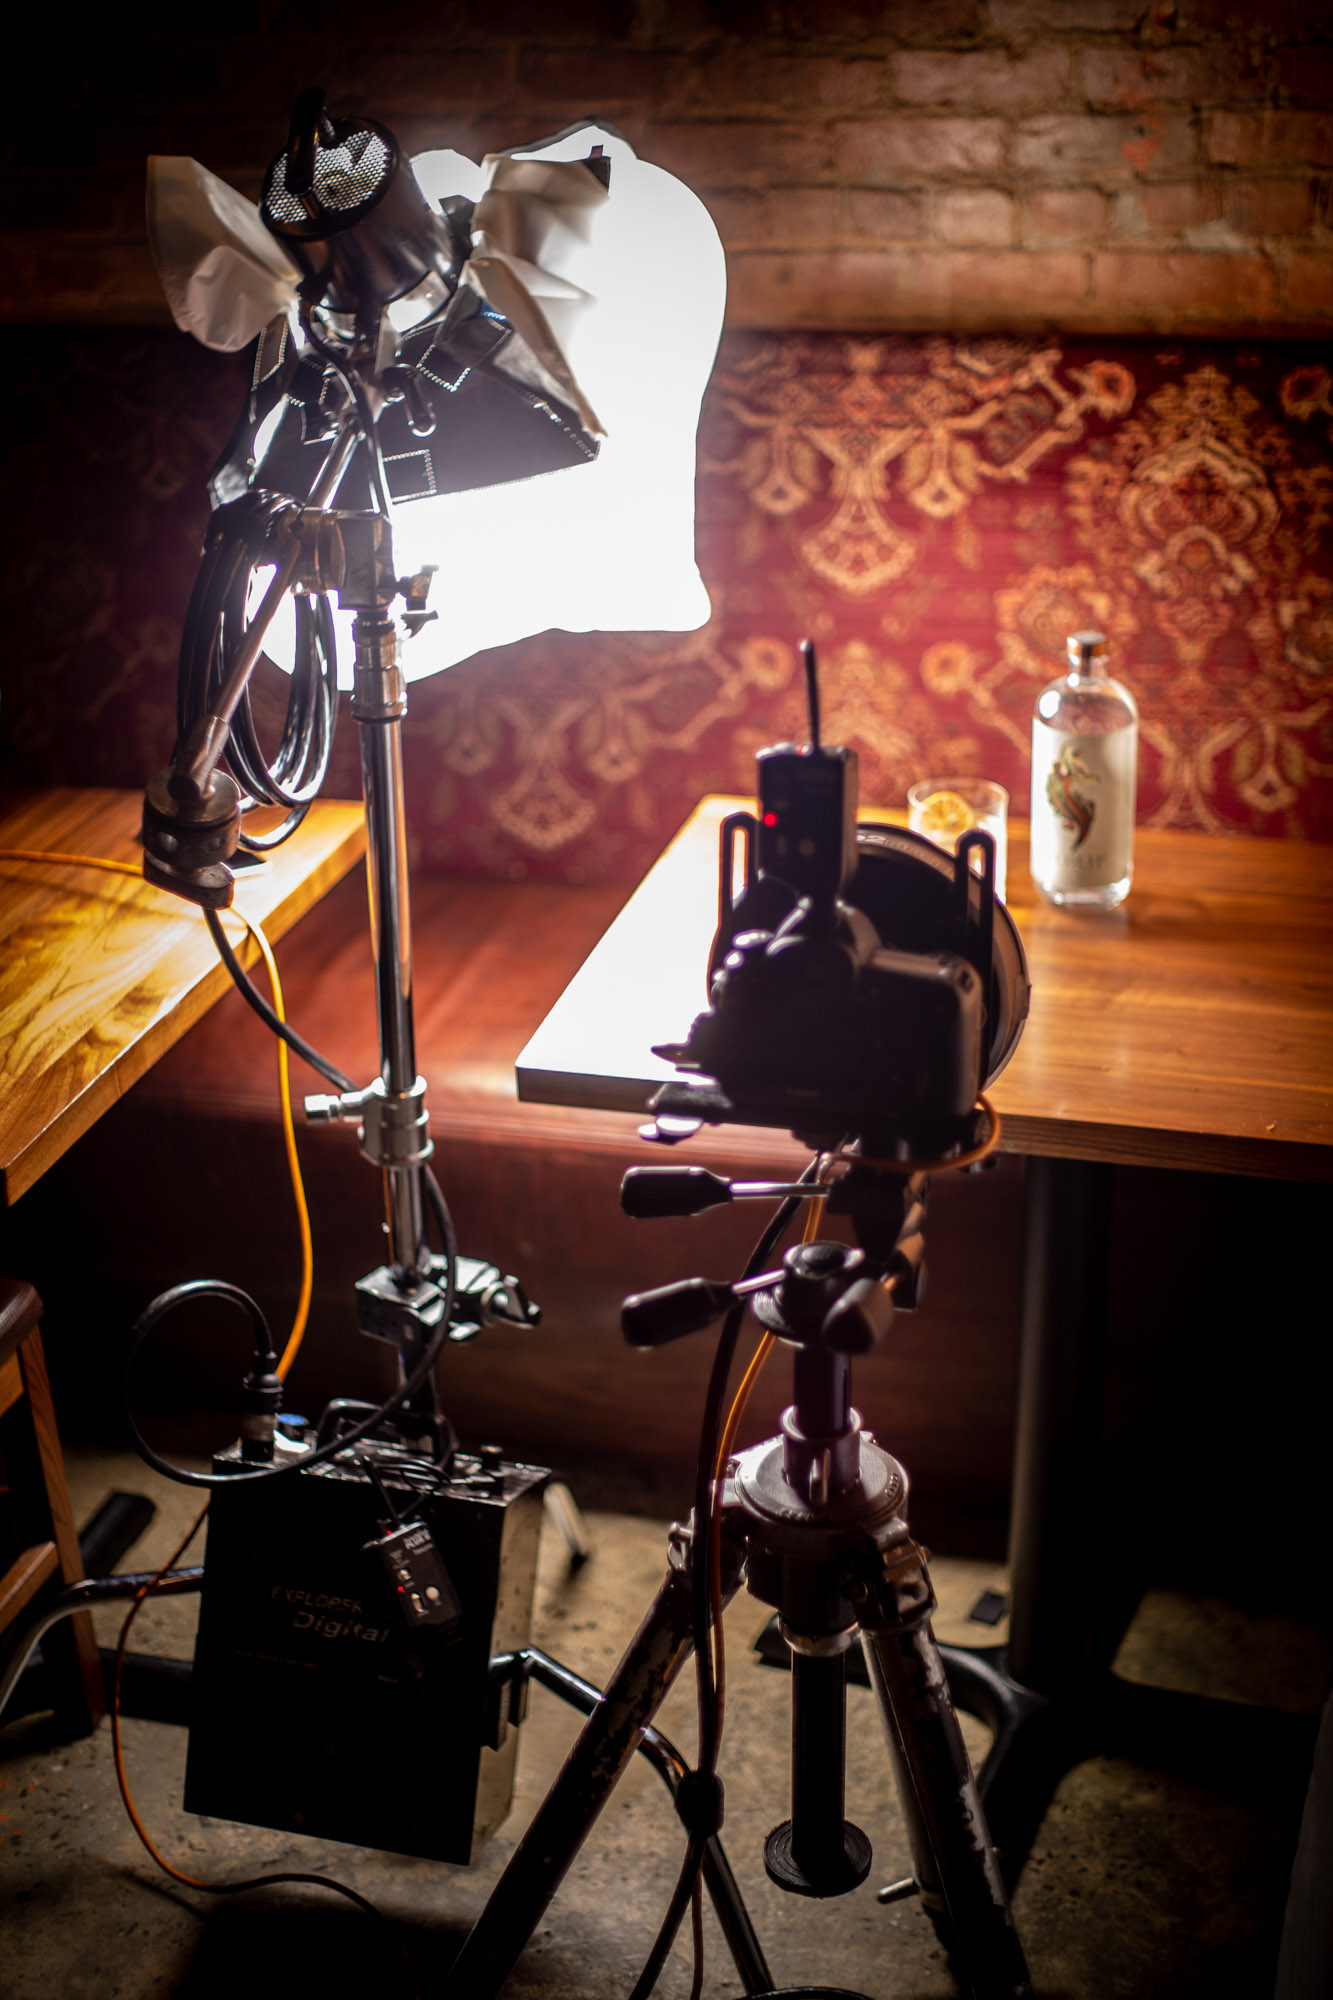 Behind the scenes of a cocktail being photographed at the restaurant Covina.